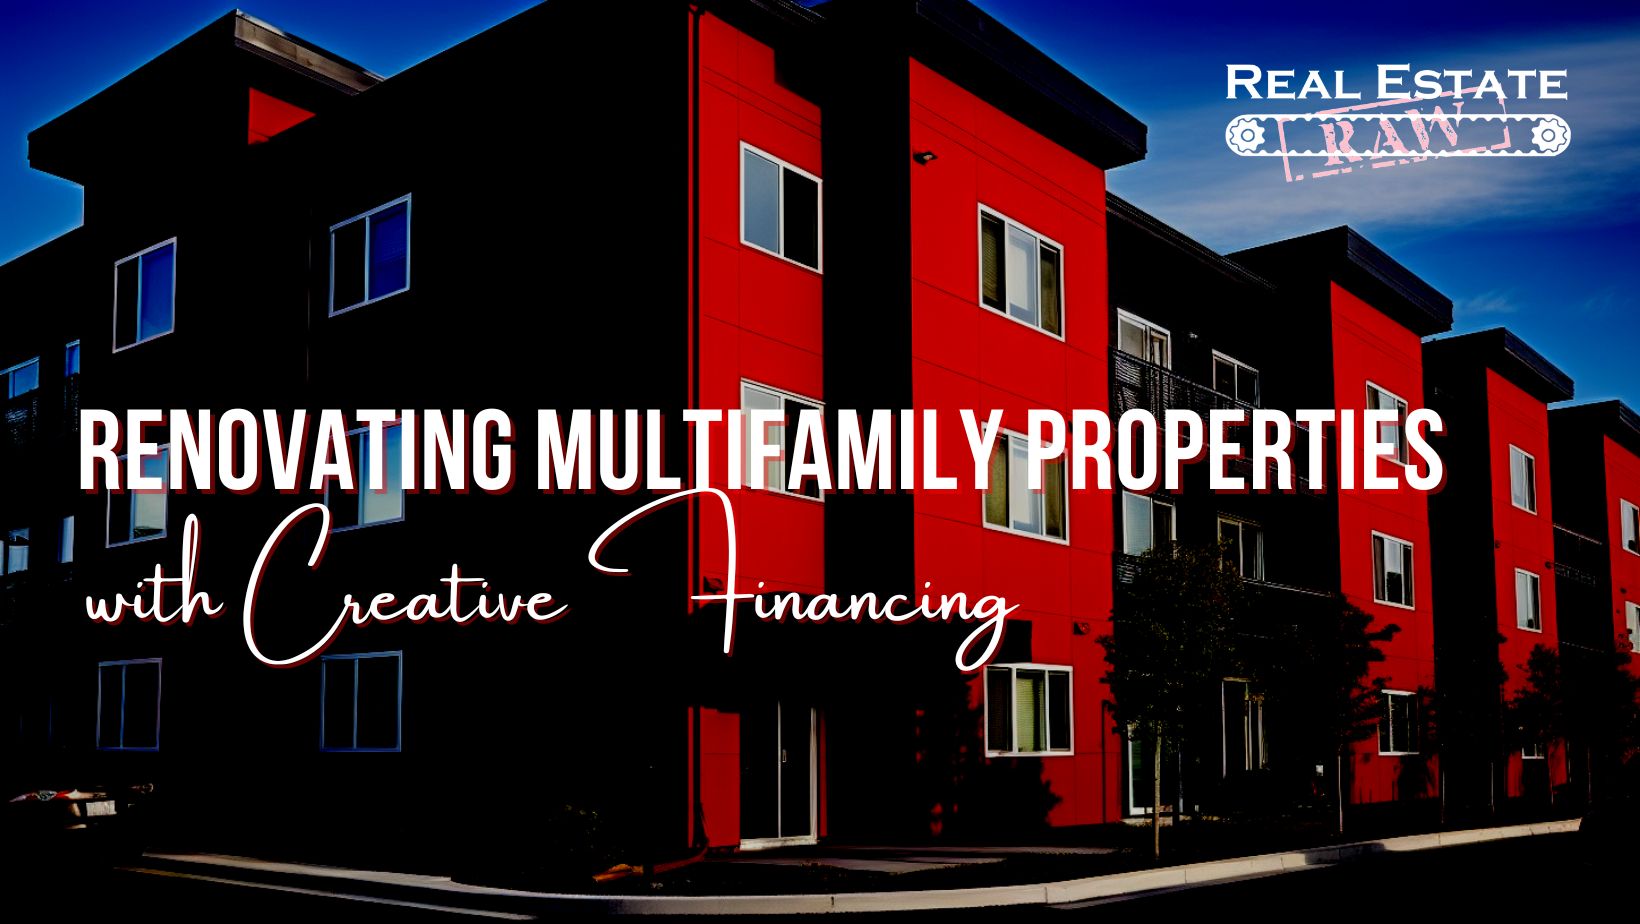 Renovating Multifamily Properties with Creative Financing